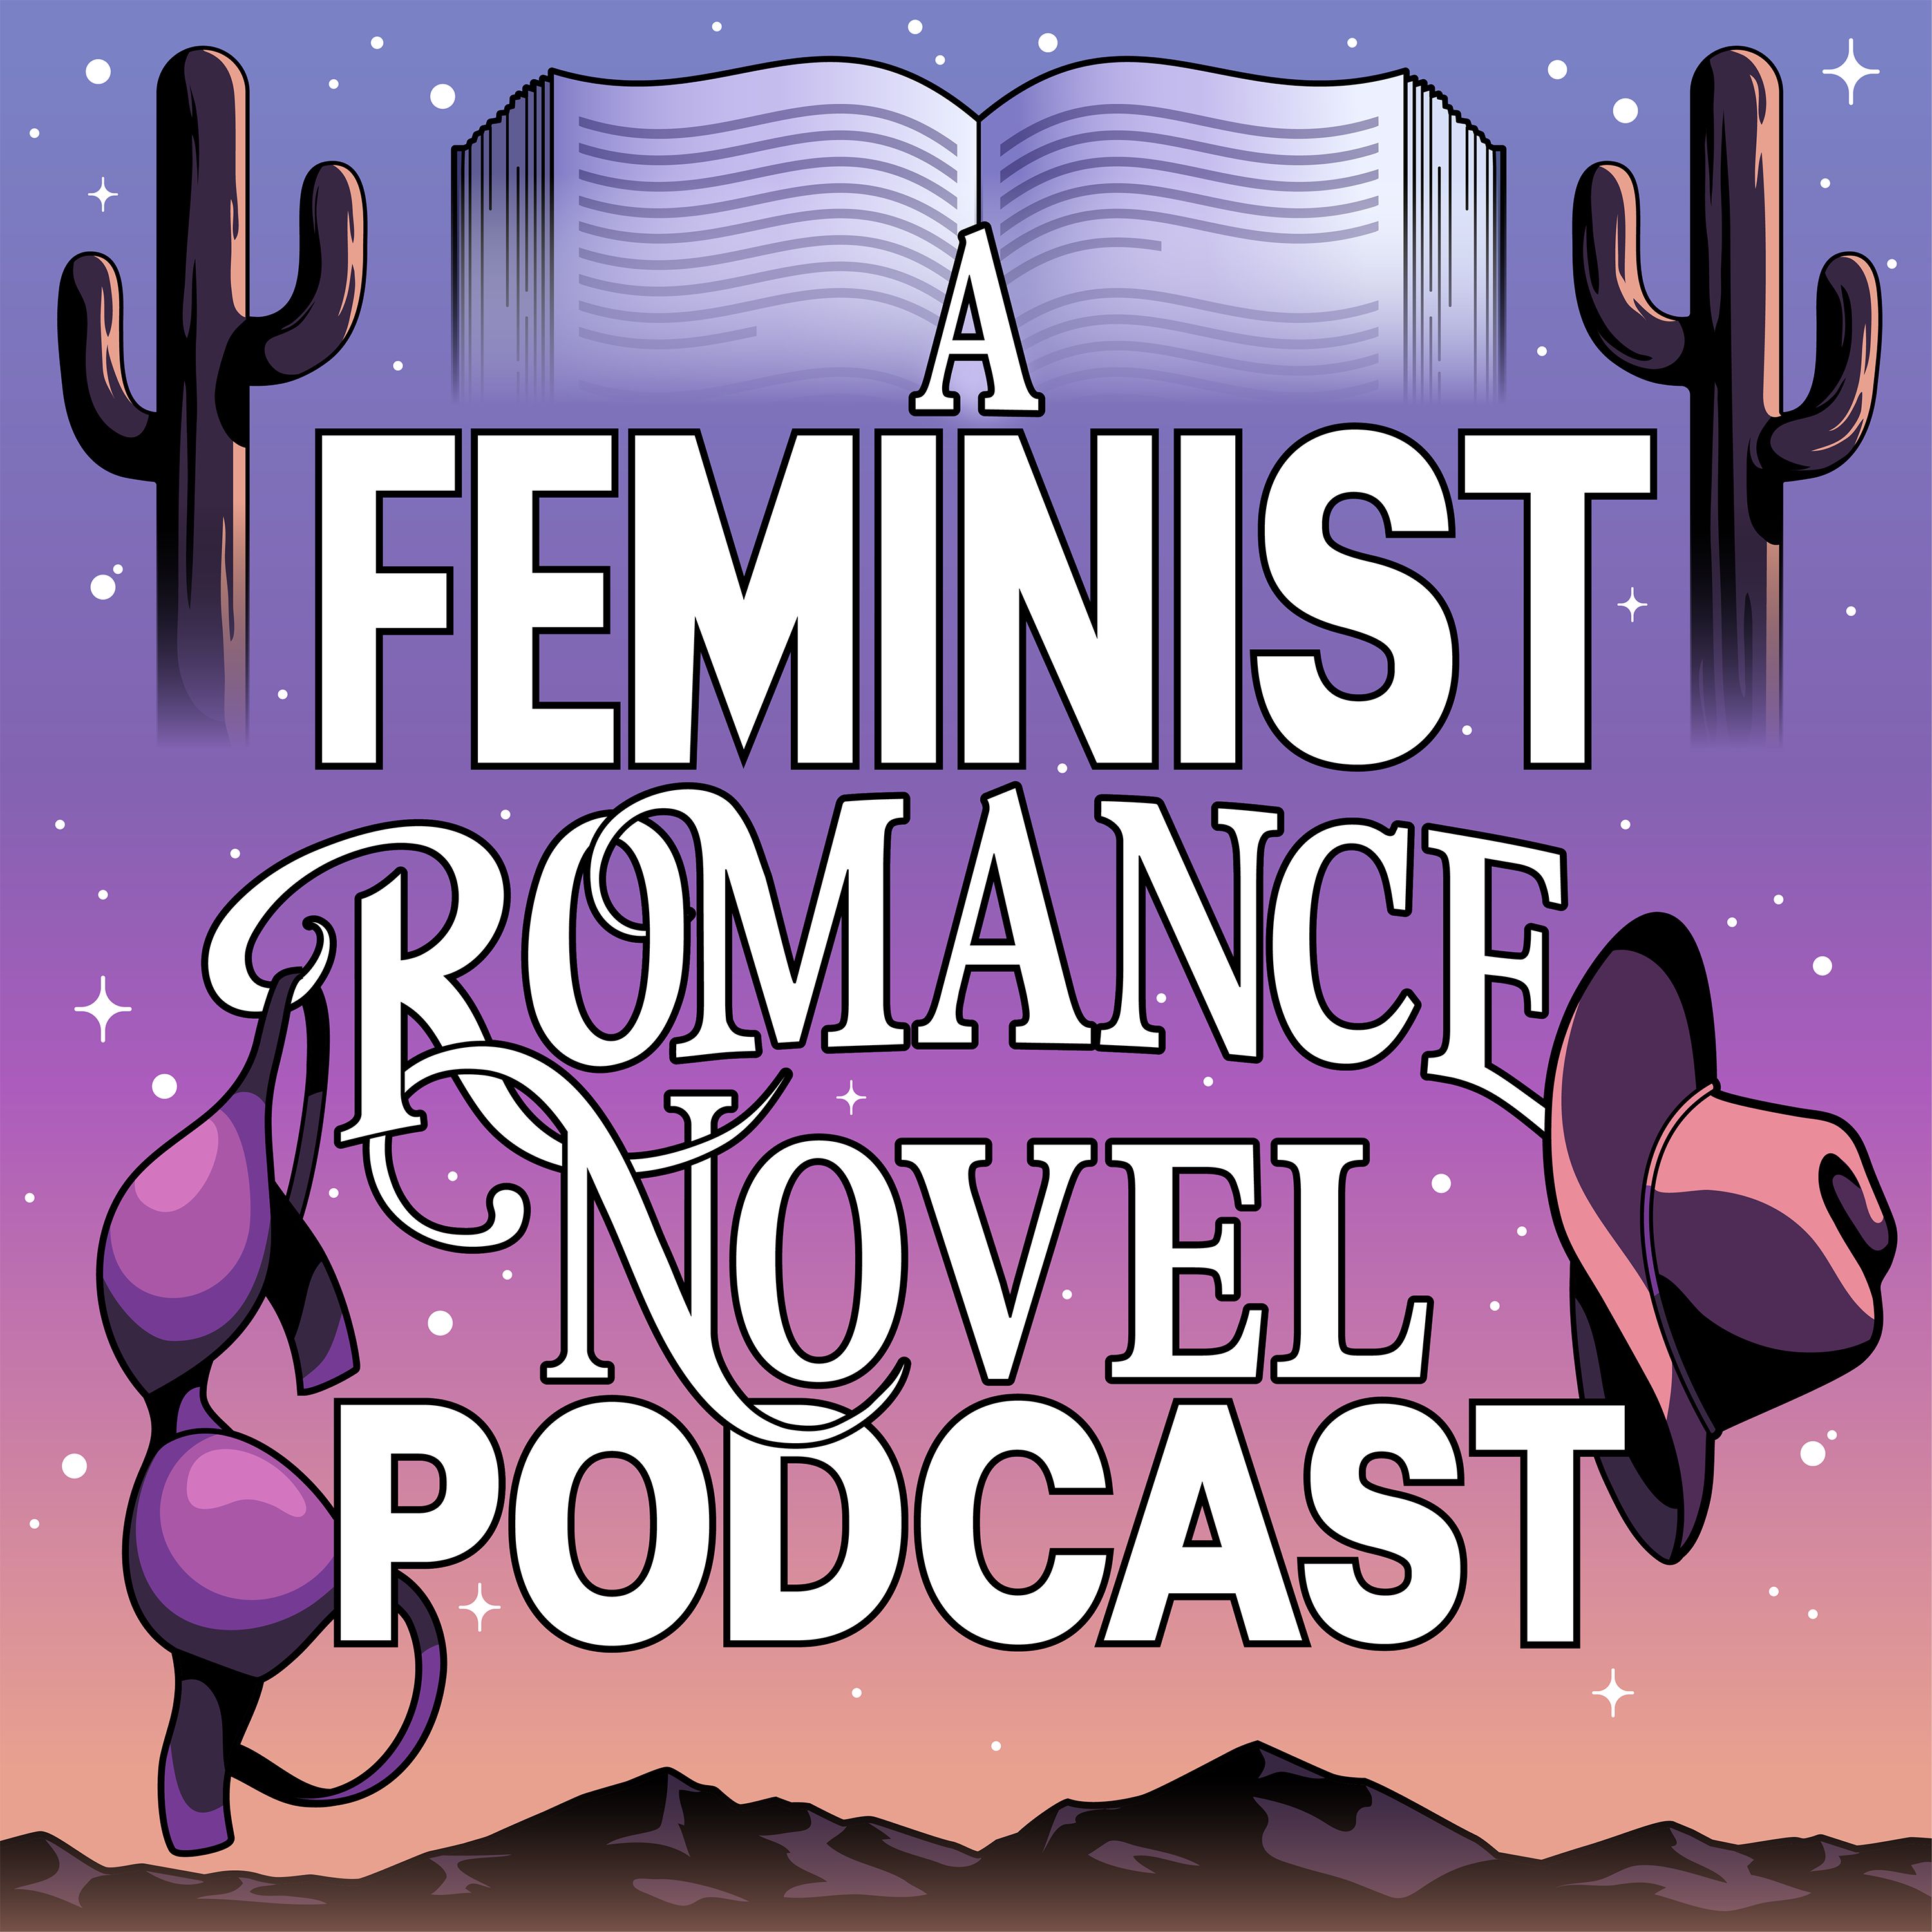 A Feminist Romance Novel, Podcast! Temptations at Sweetwater Creek